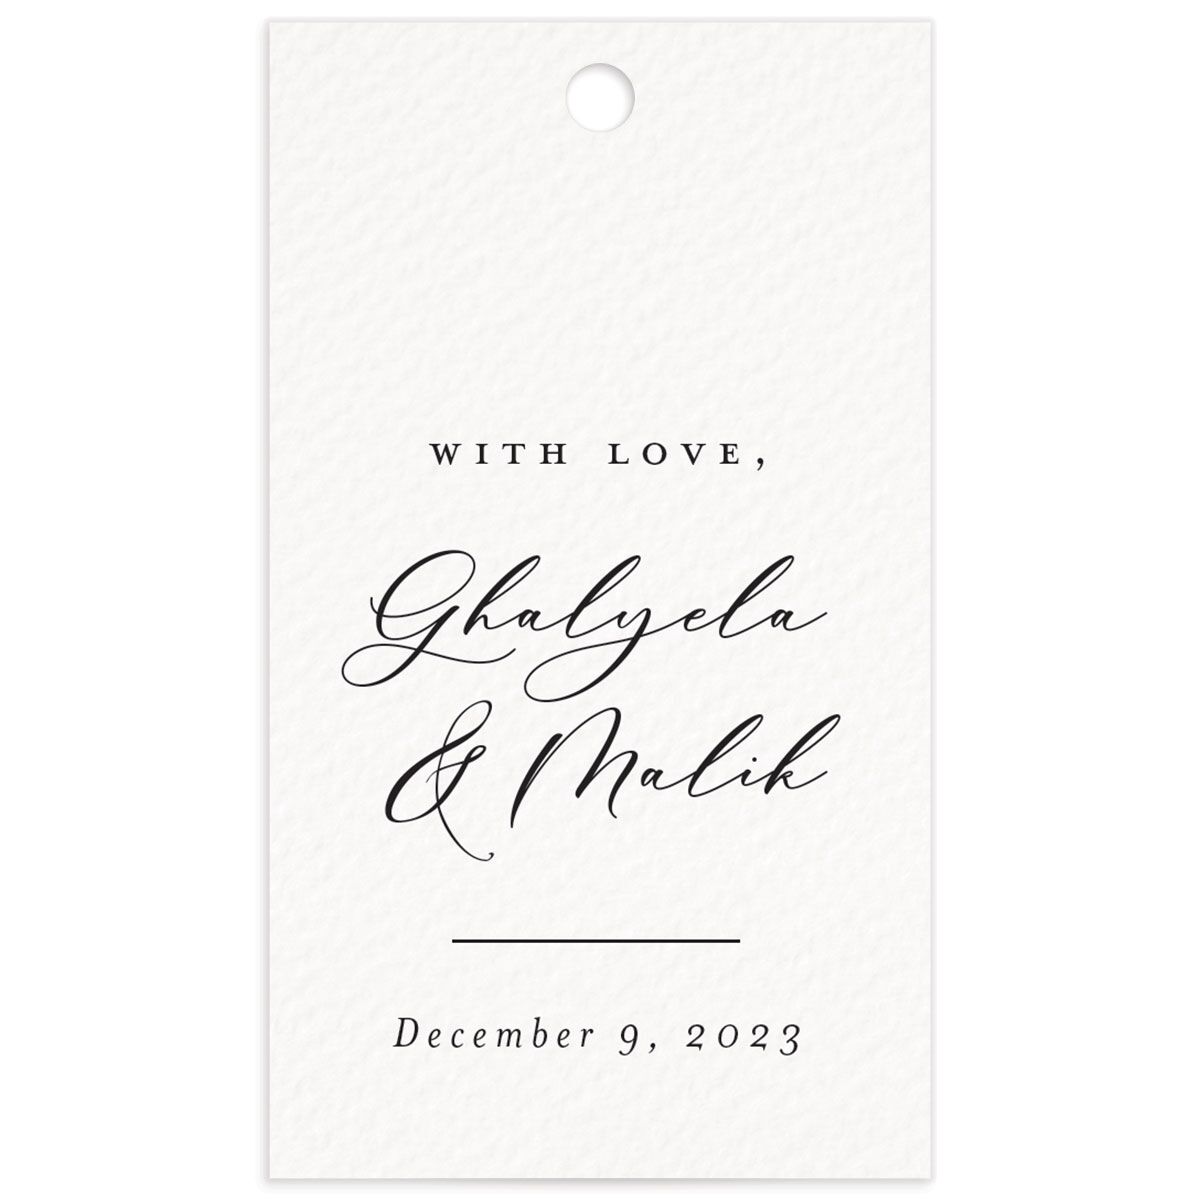 Snowy Wreath Favor Gift Tags back in green